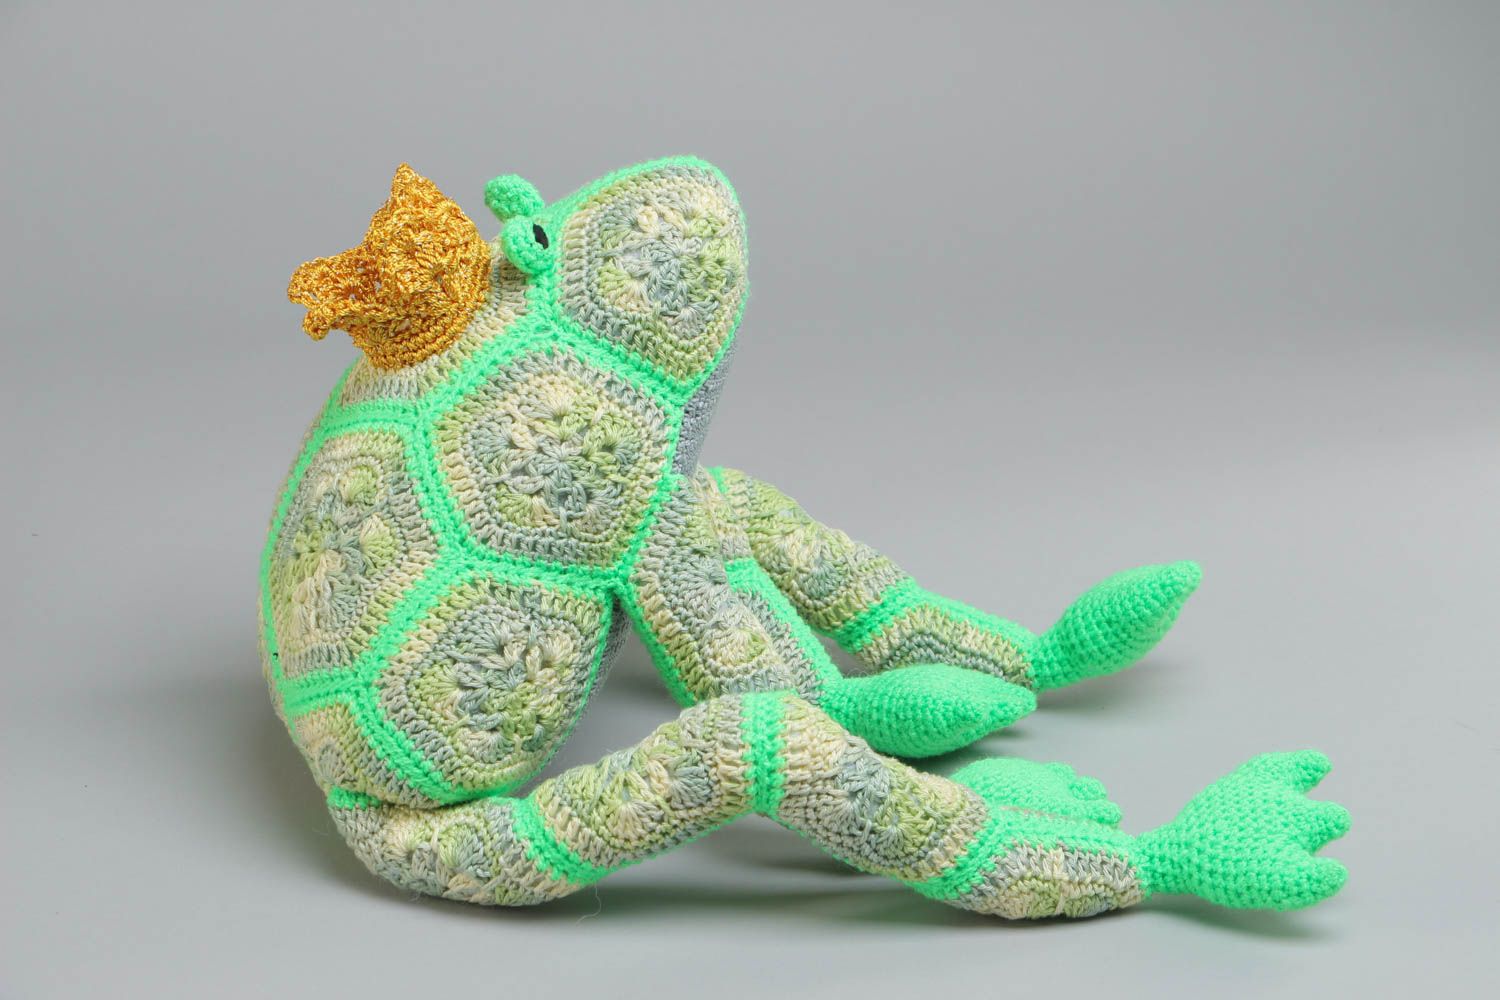 Homemade crochet soft toy frog for children and home decor photo 2